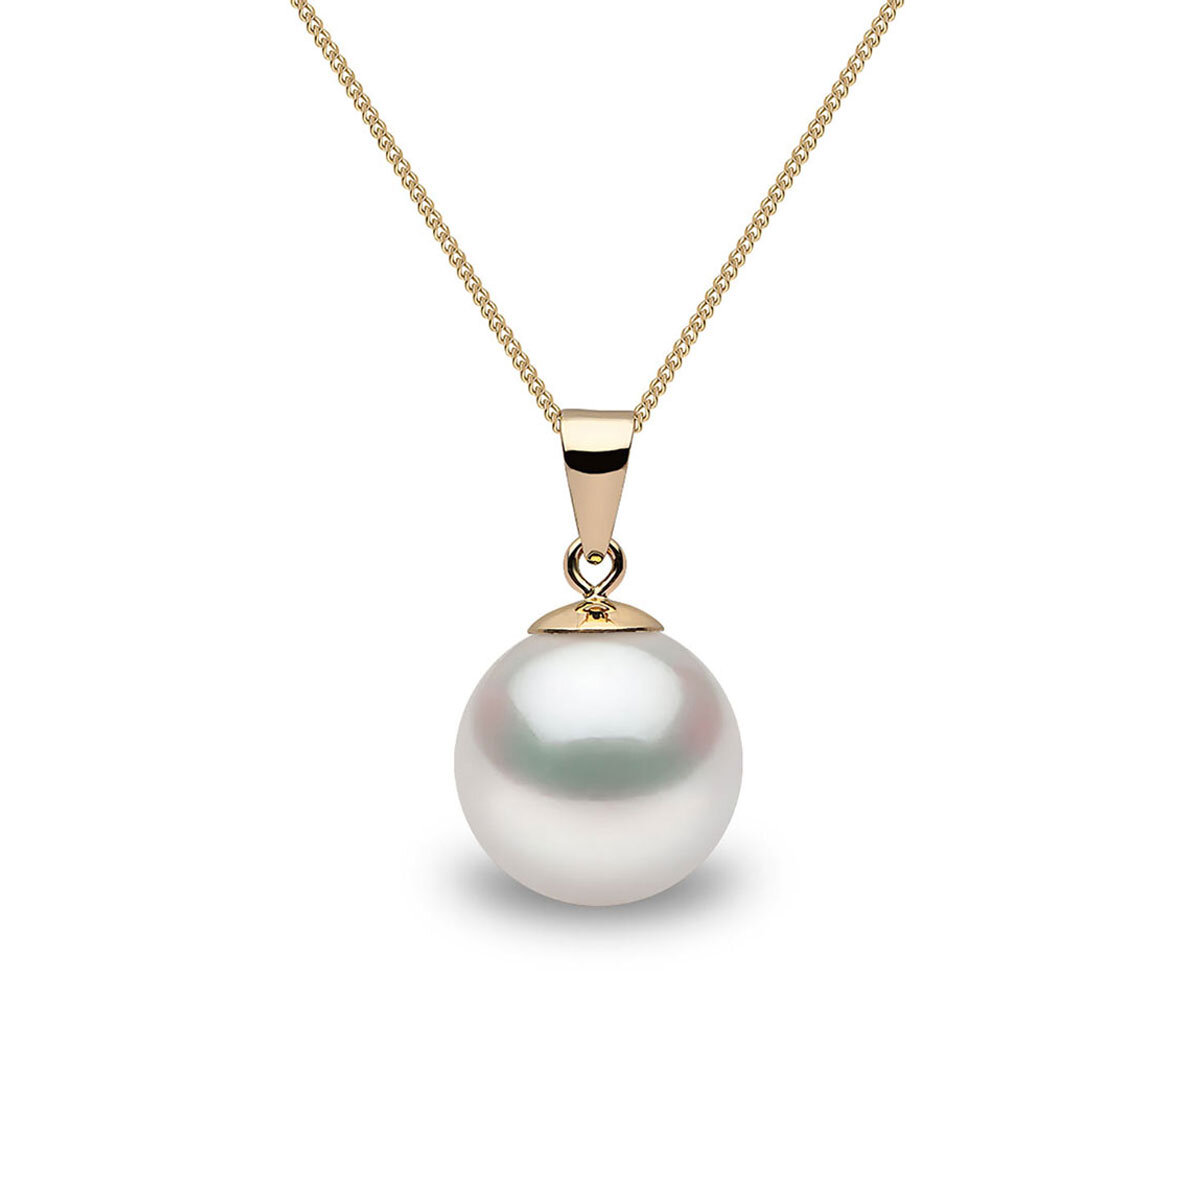 10-10.5mm Cultured Freshwater White Pearl Pendant, 18ct Yellow Gold